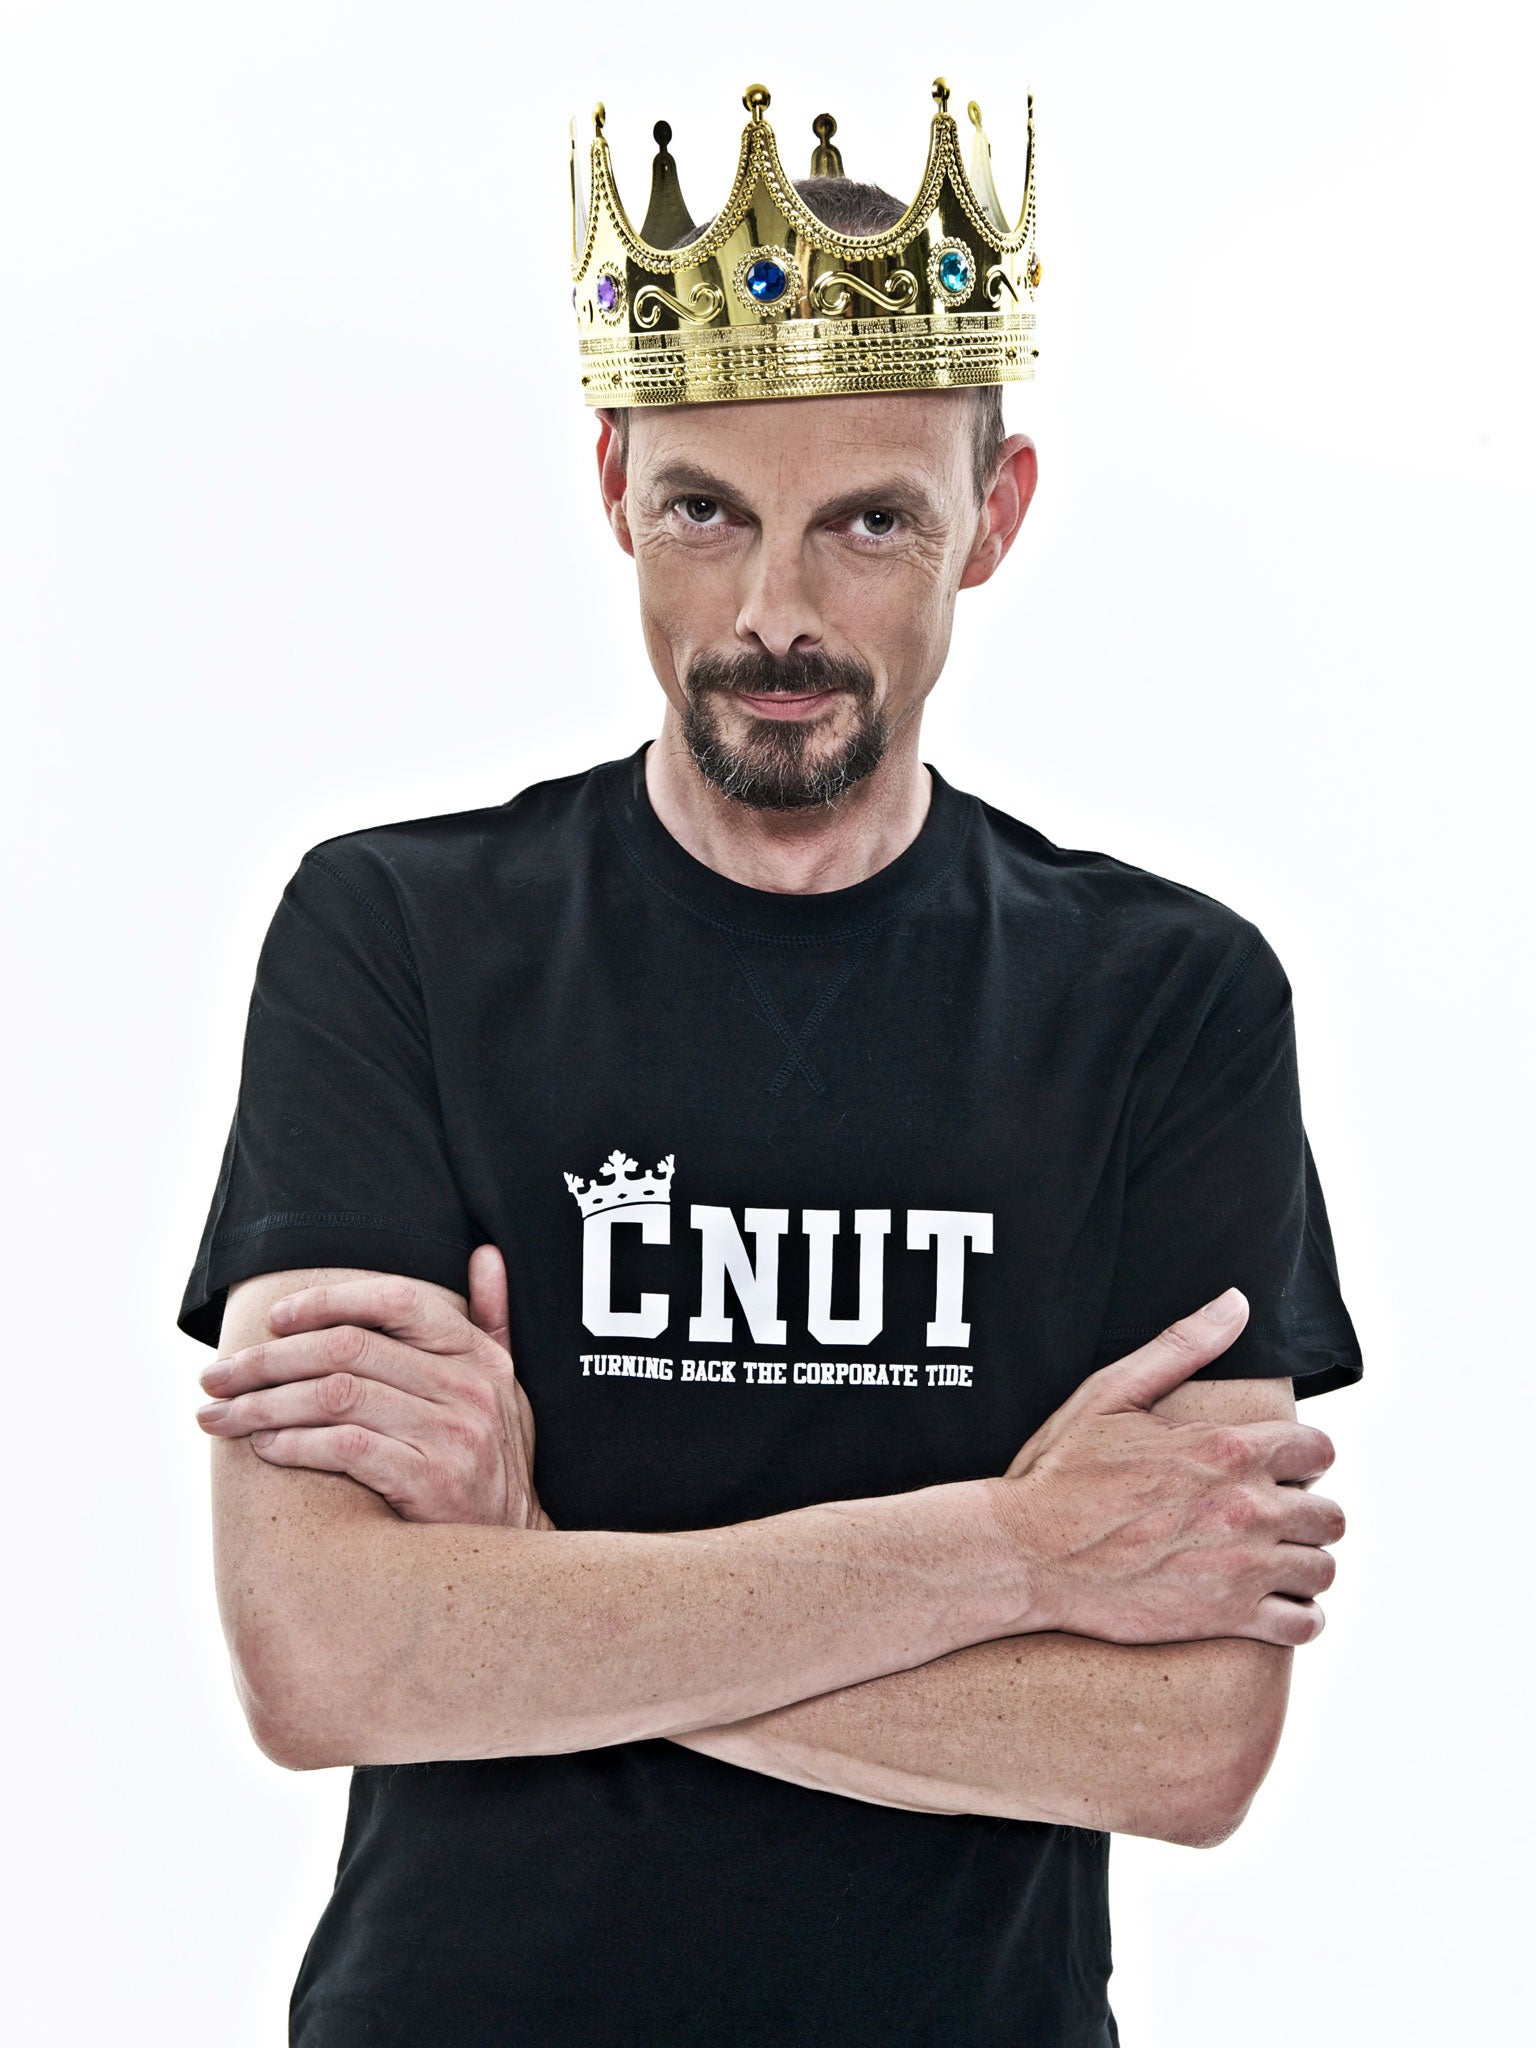 Comedian Dave Griffiths, the self-styled ‘King Cnut’